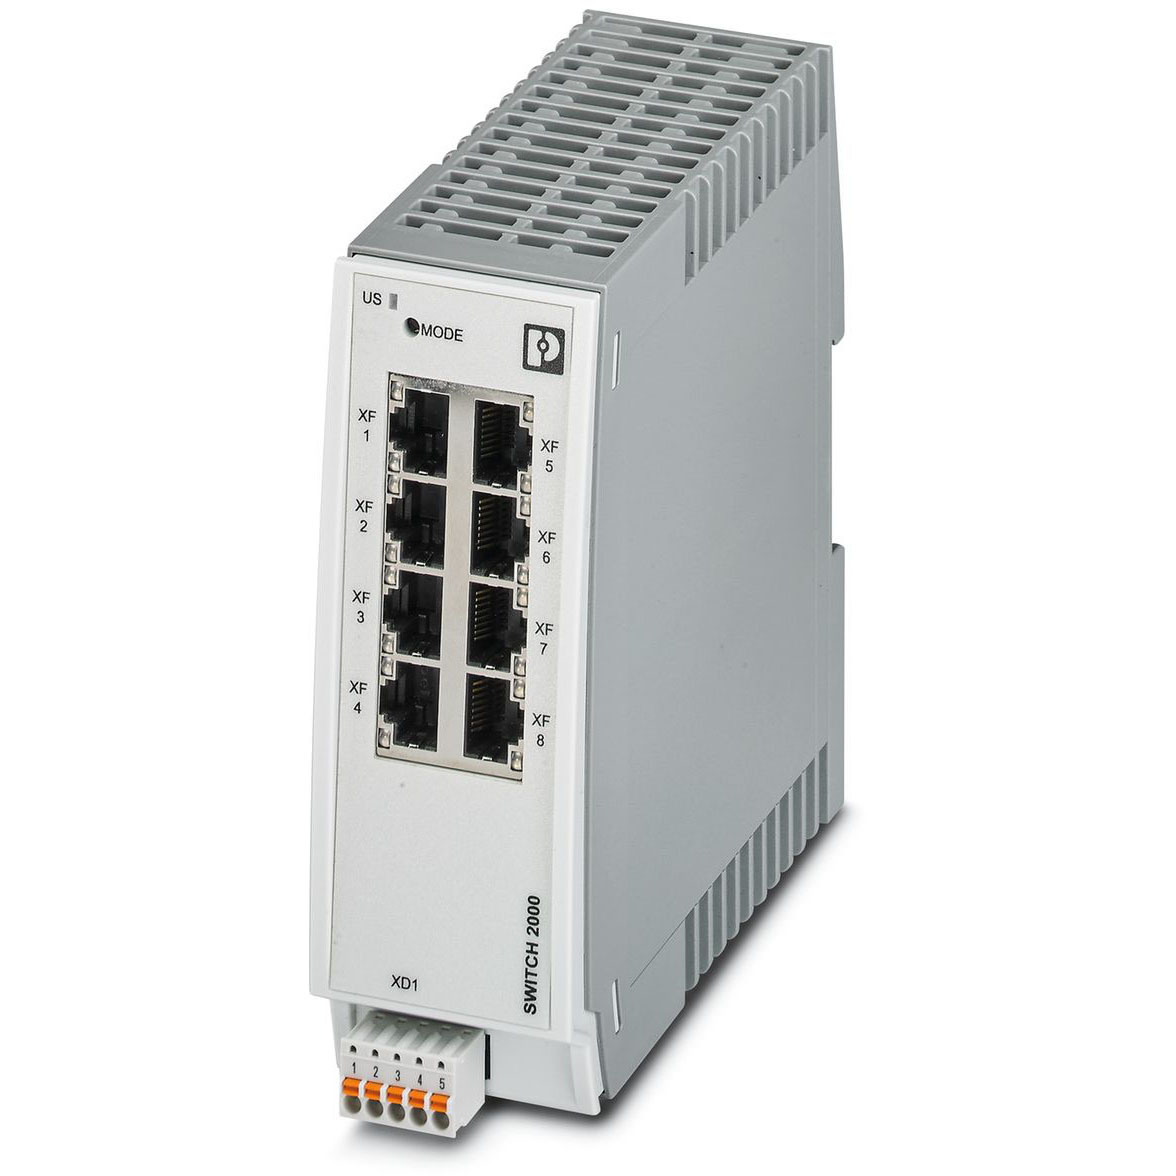 Phoenix Contact - Industrial Ethernet switches selector and 